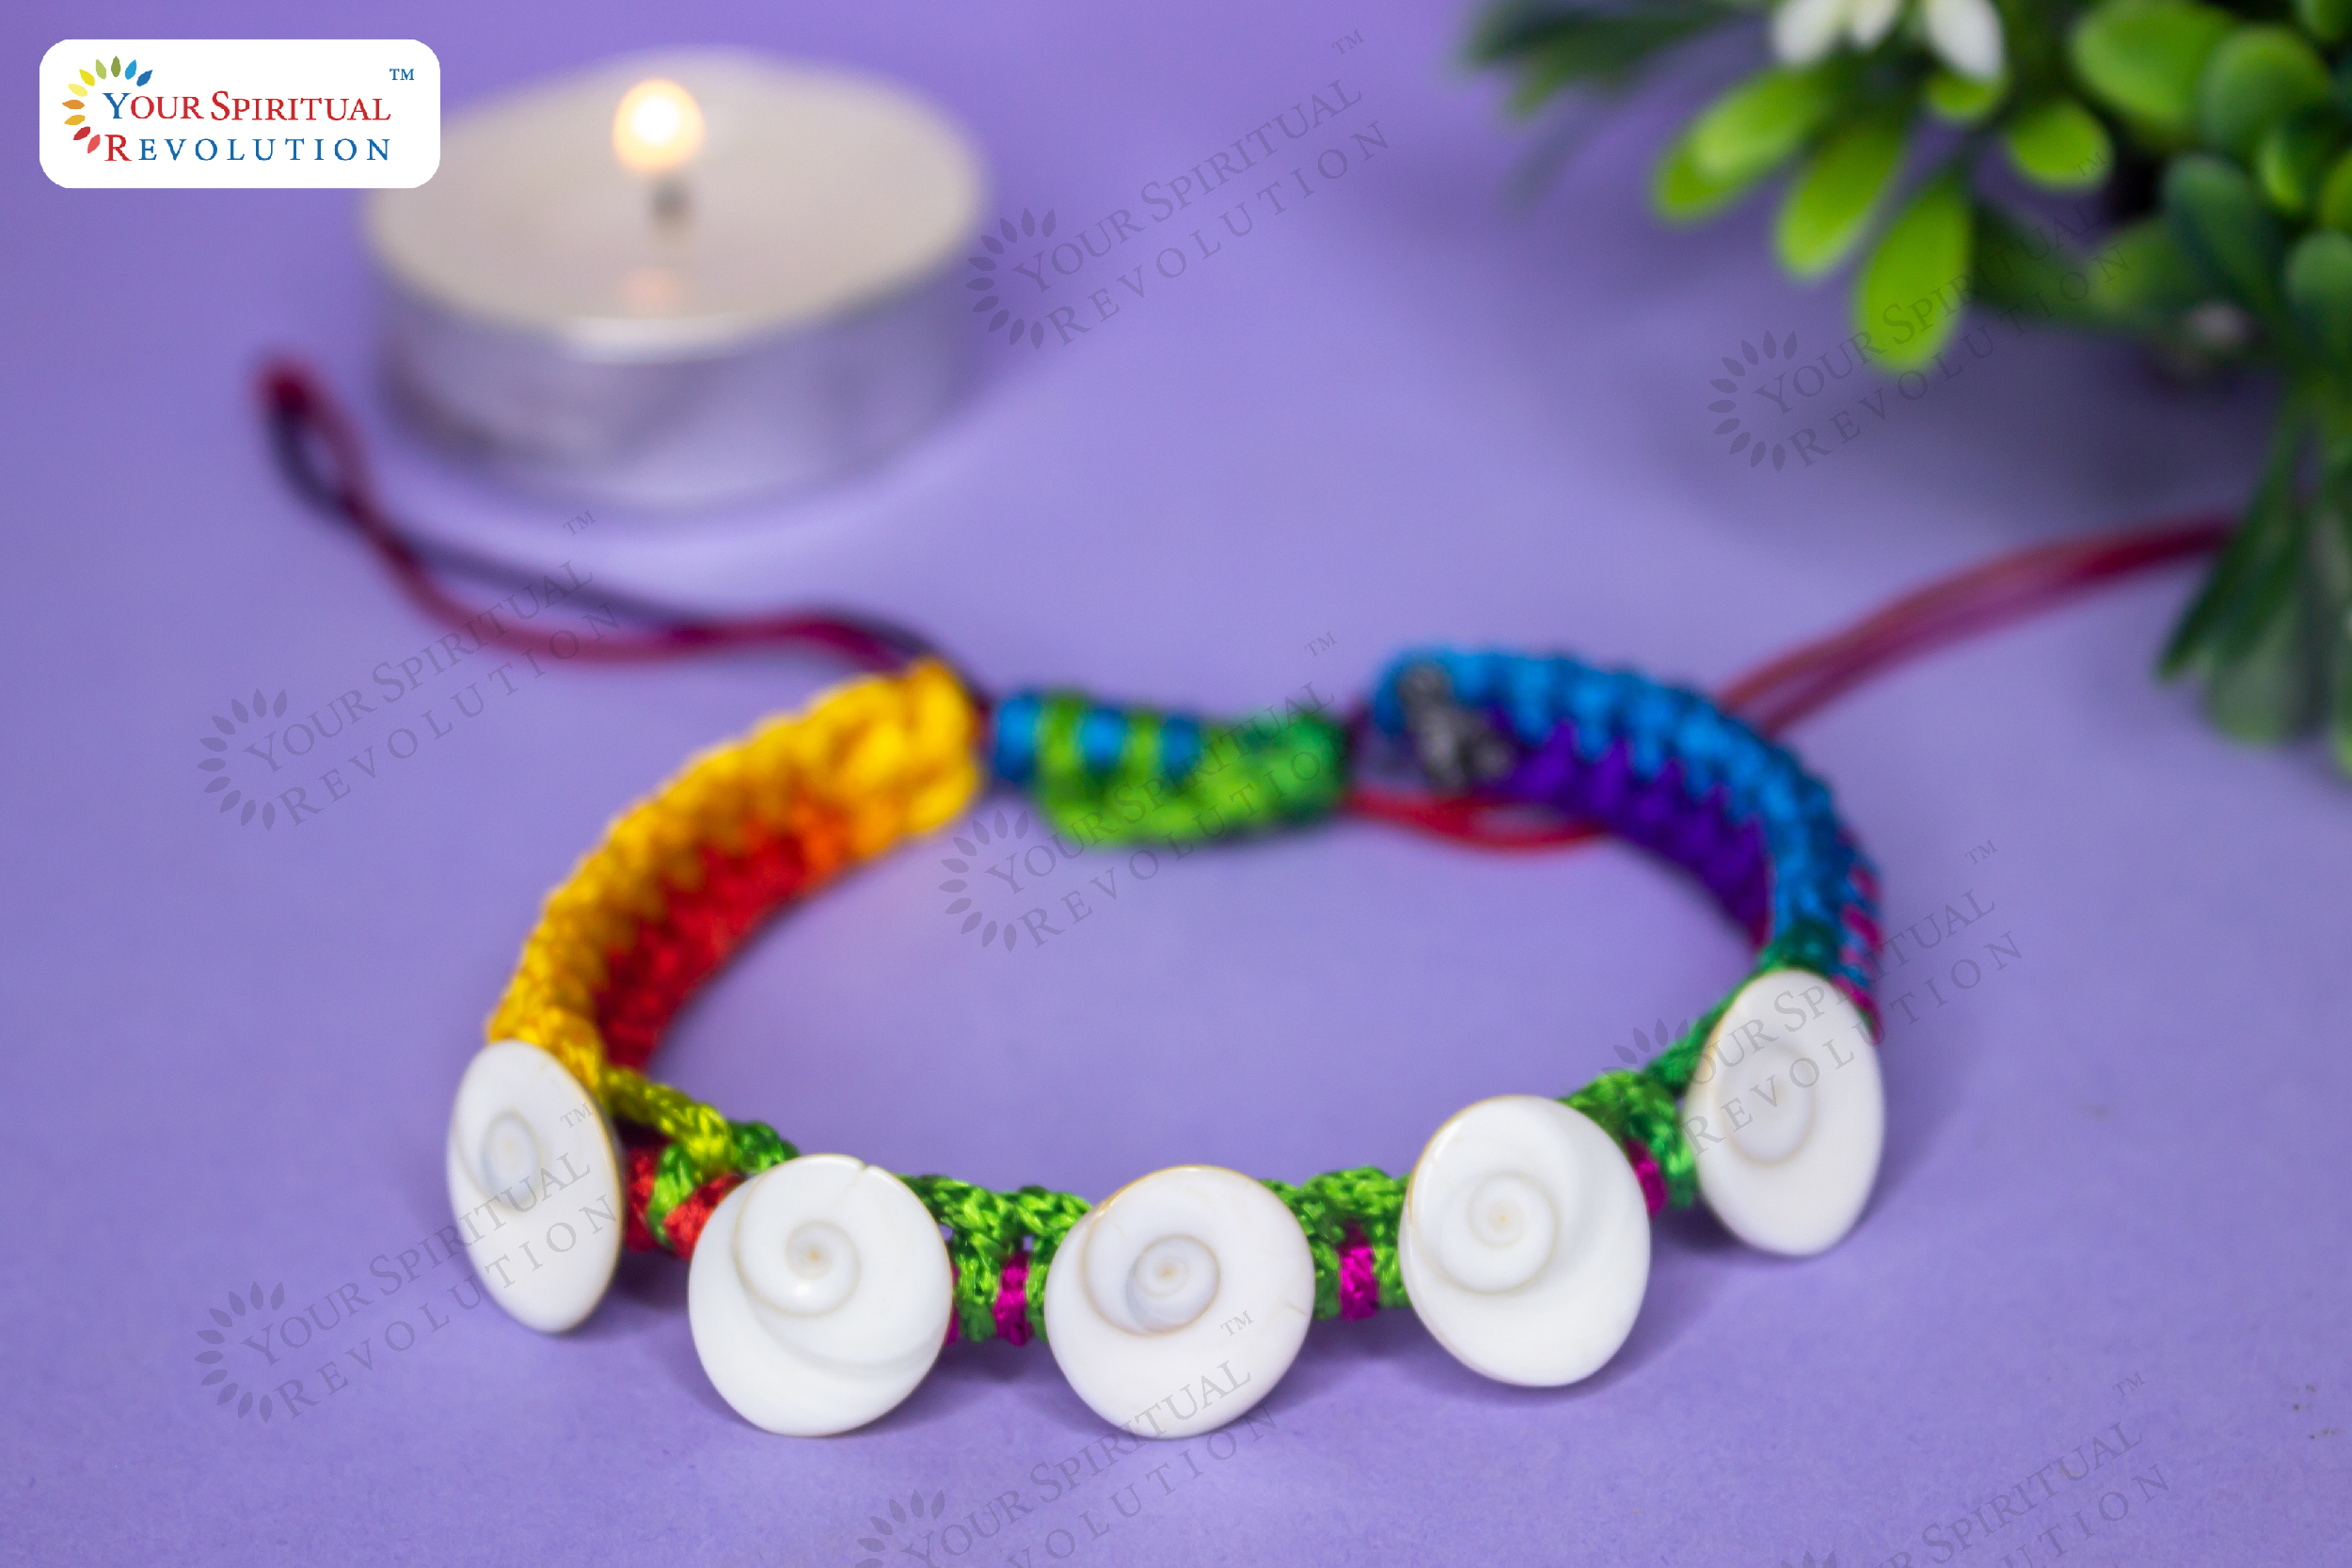 Buy GOMTI CHAKRA BRACELET FOR MEN AND WOMEN- SIZE ADJUSTABLE Red at  Amazon.in